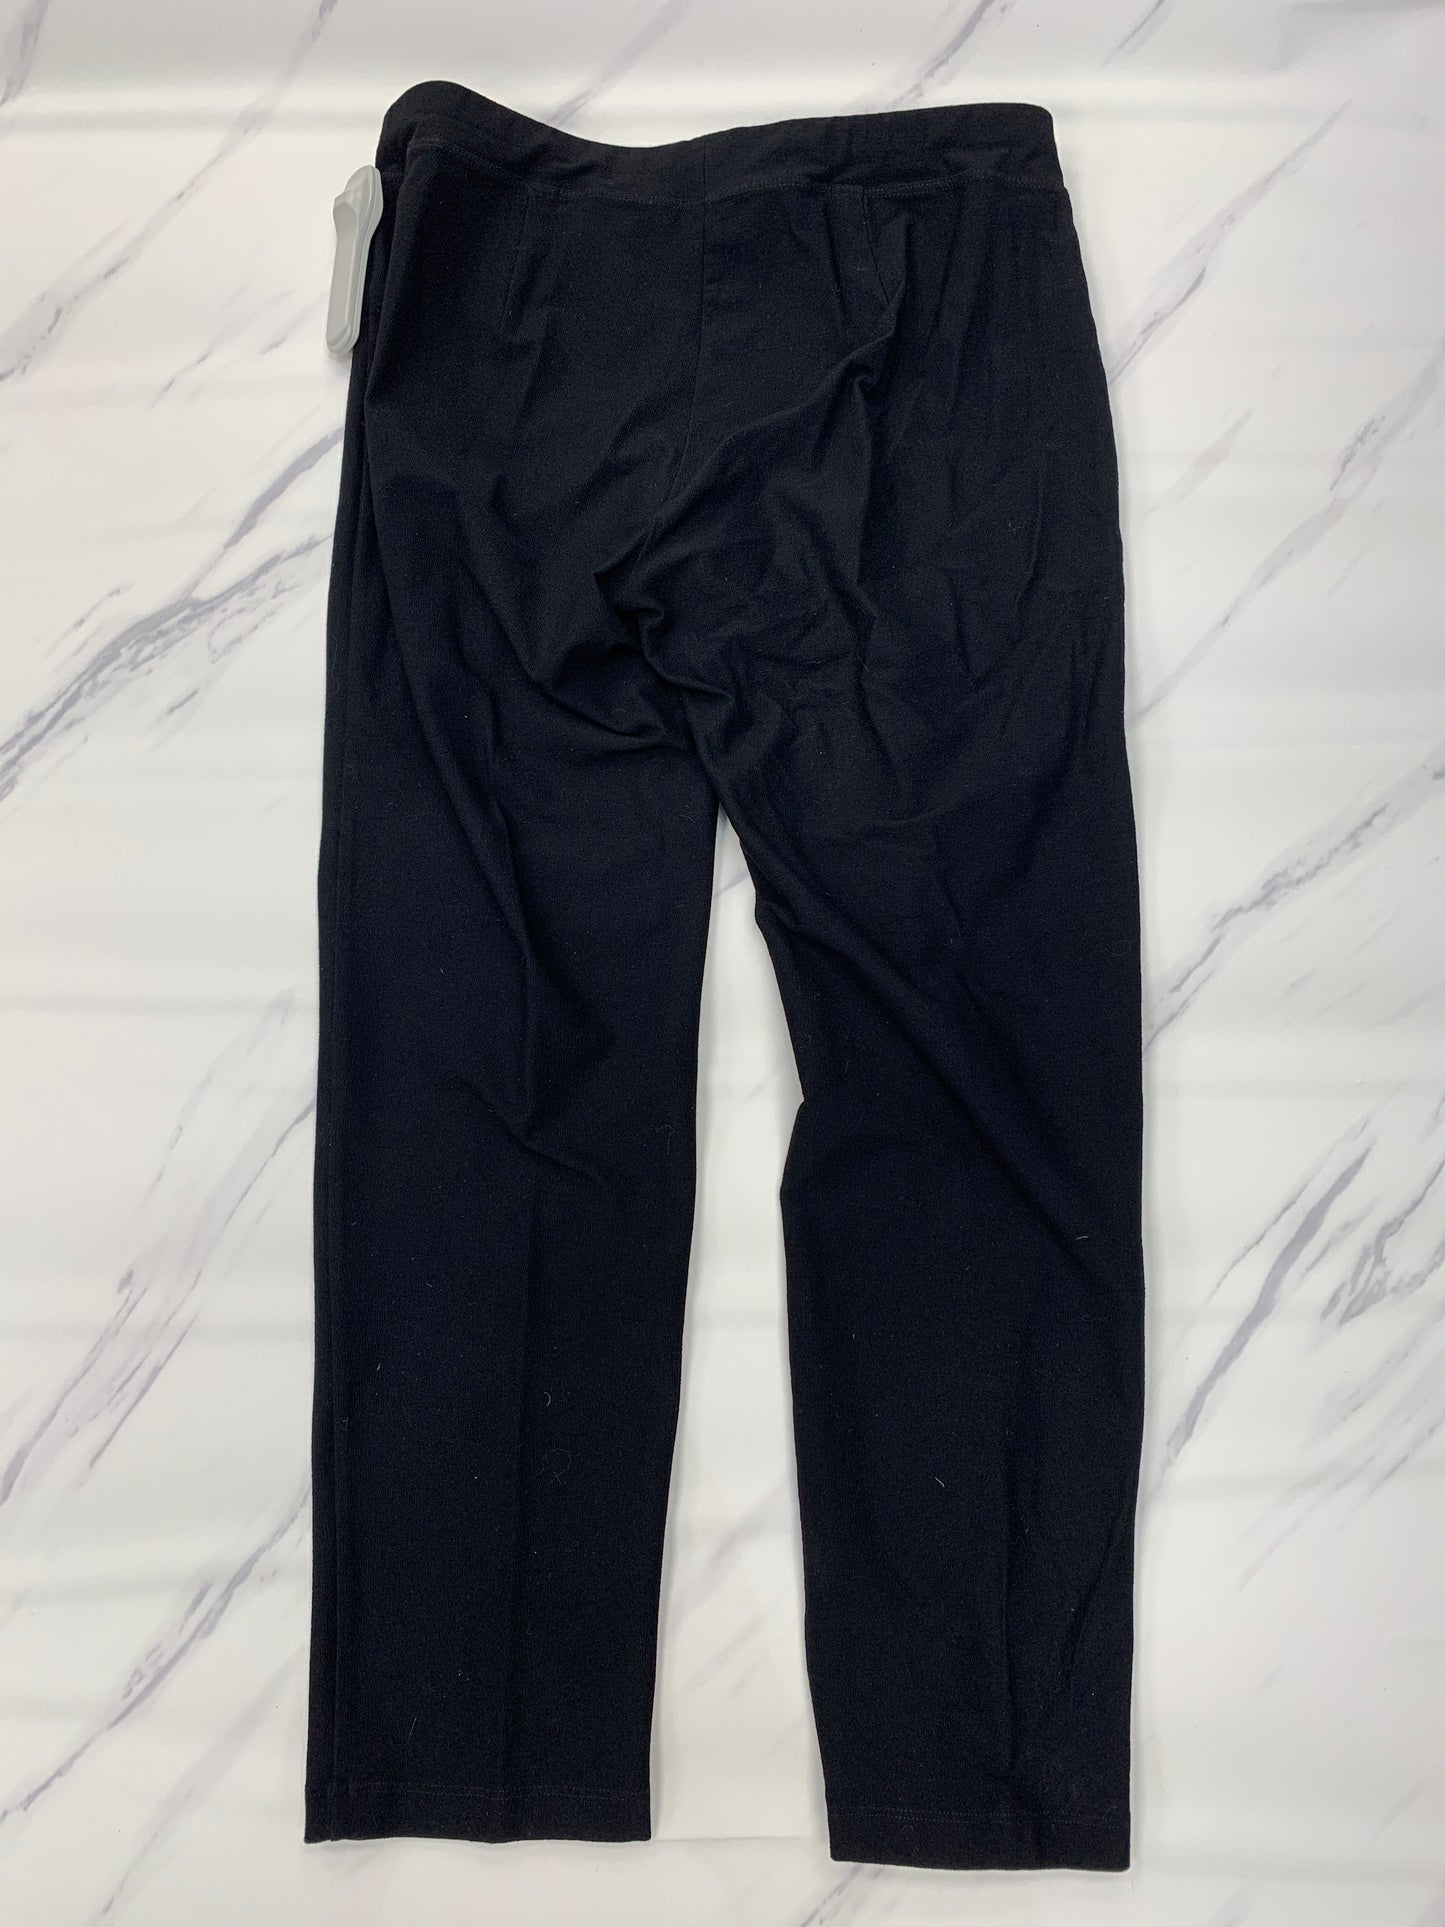 Pants Lounge By Eileen Fisher  Size: Petite   Small